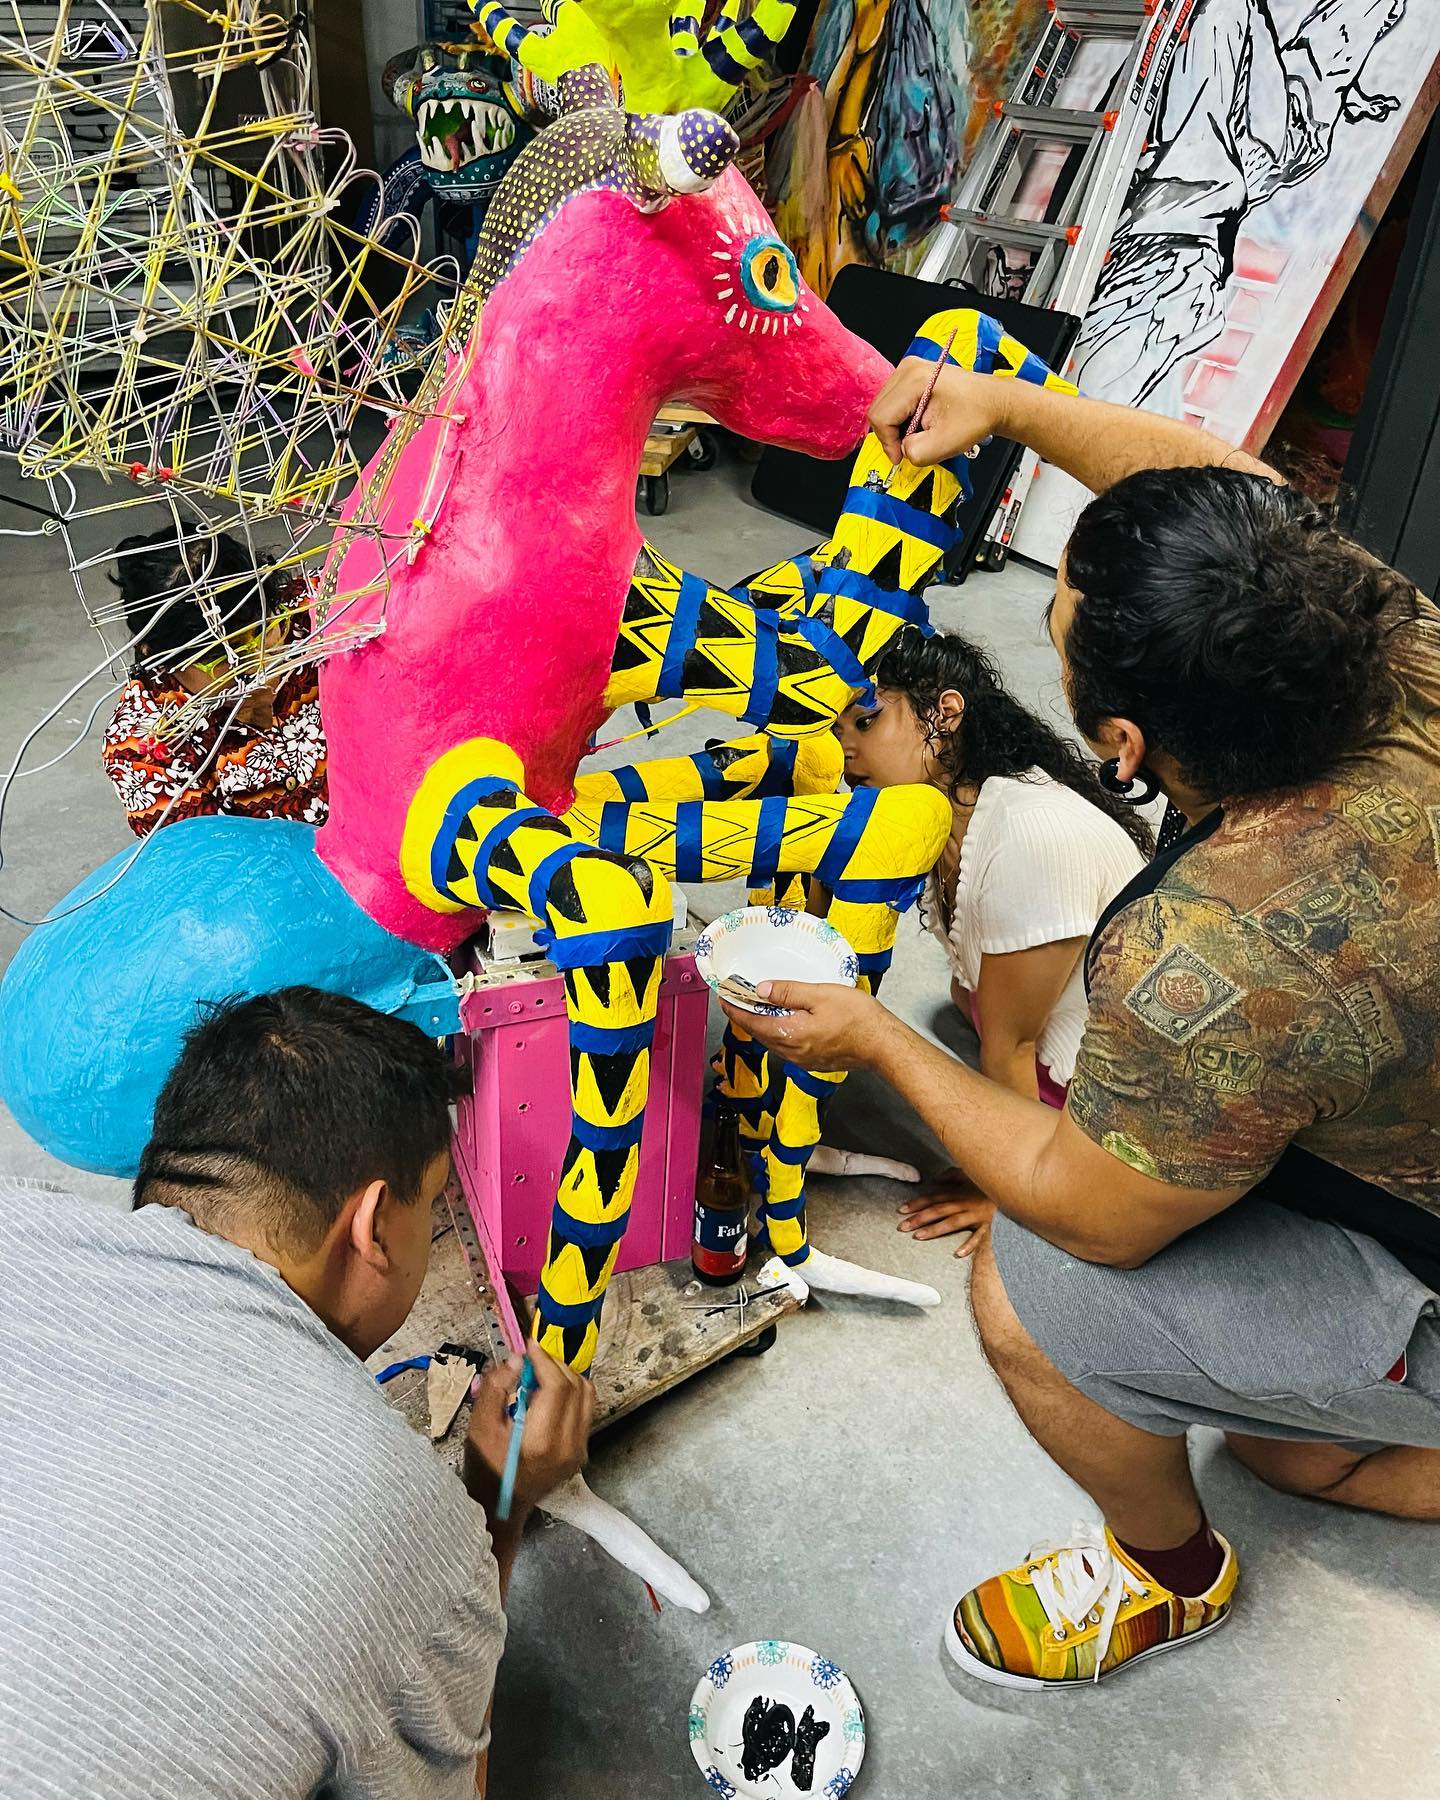 People with medium skin tone and dark hair collaborate on painting a colorful sculpture of an alebrije